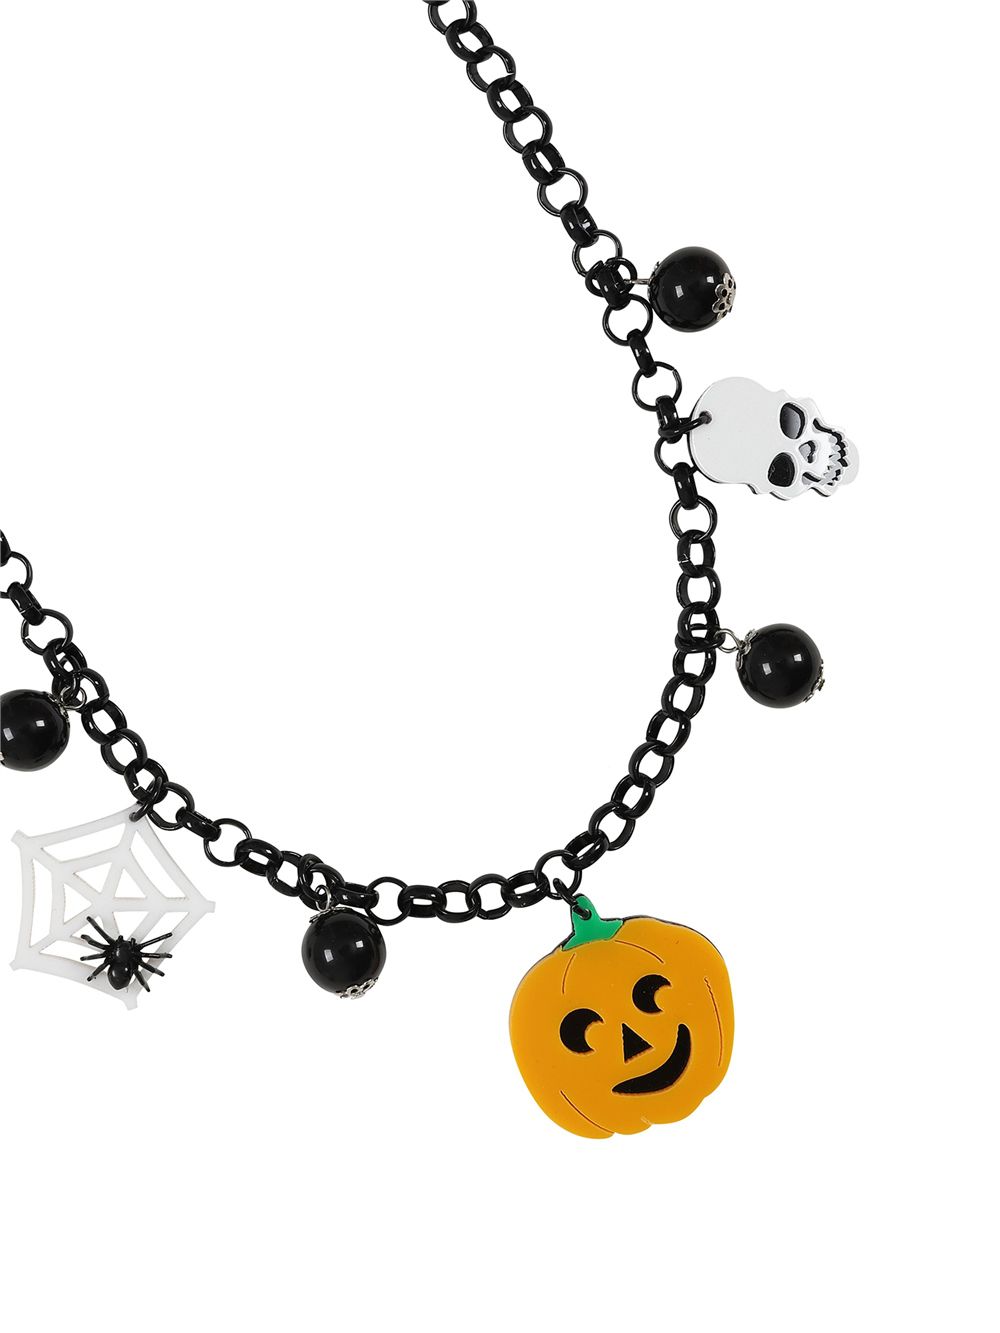 CCNE002b_collier-collectif-rockabilly-gothabilly-halloween-citrouille